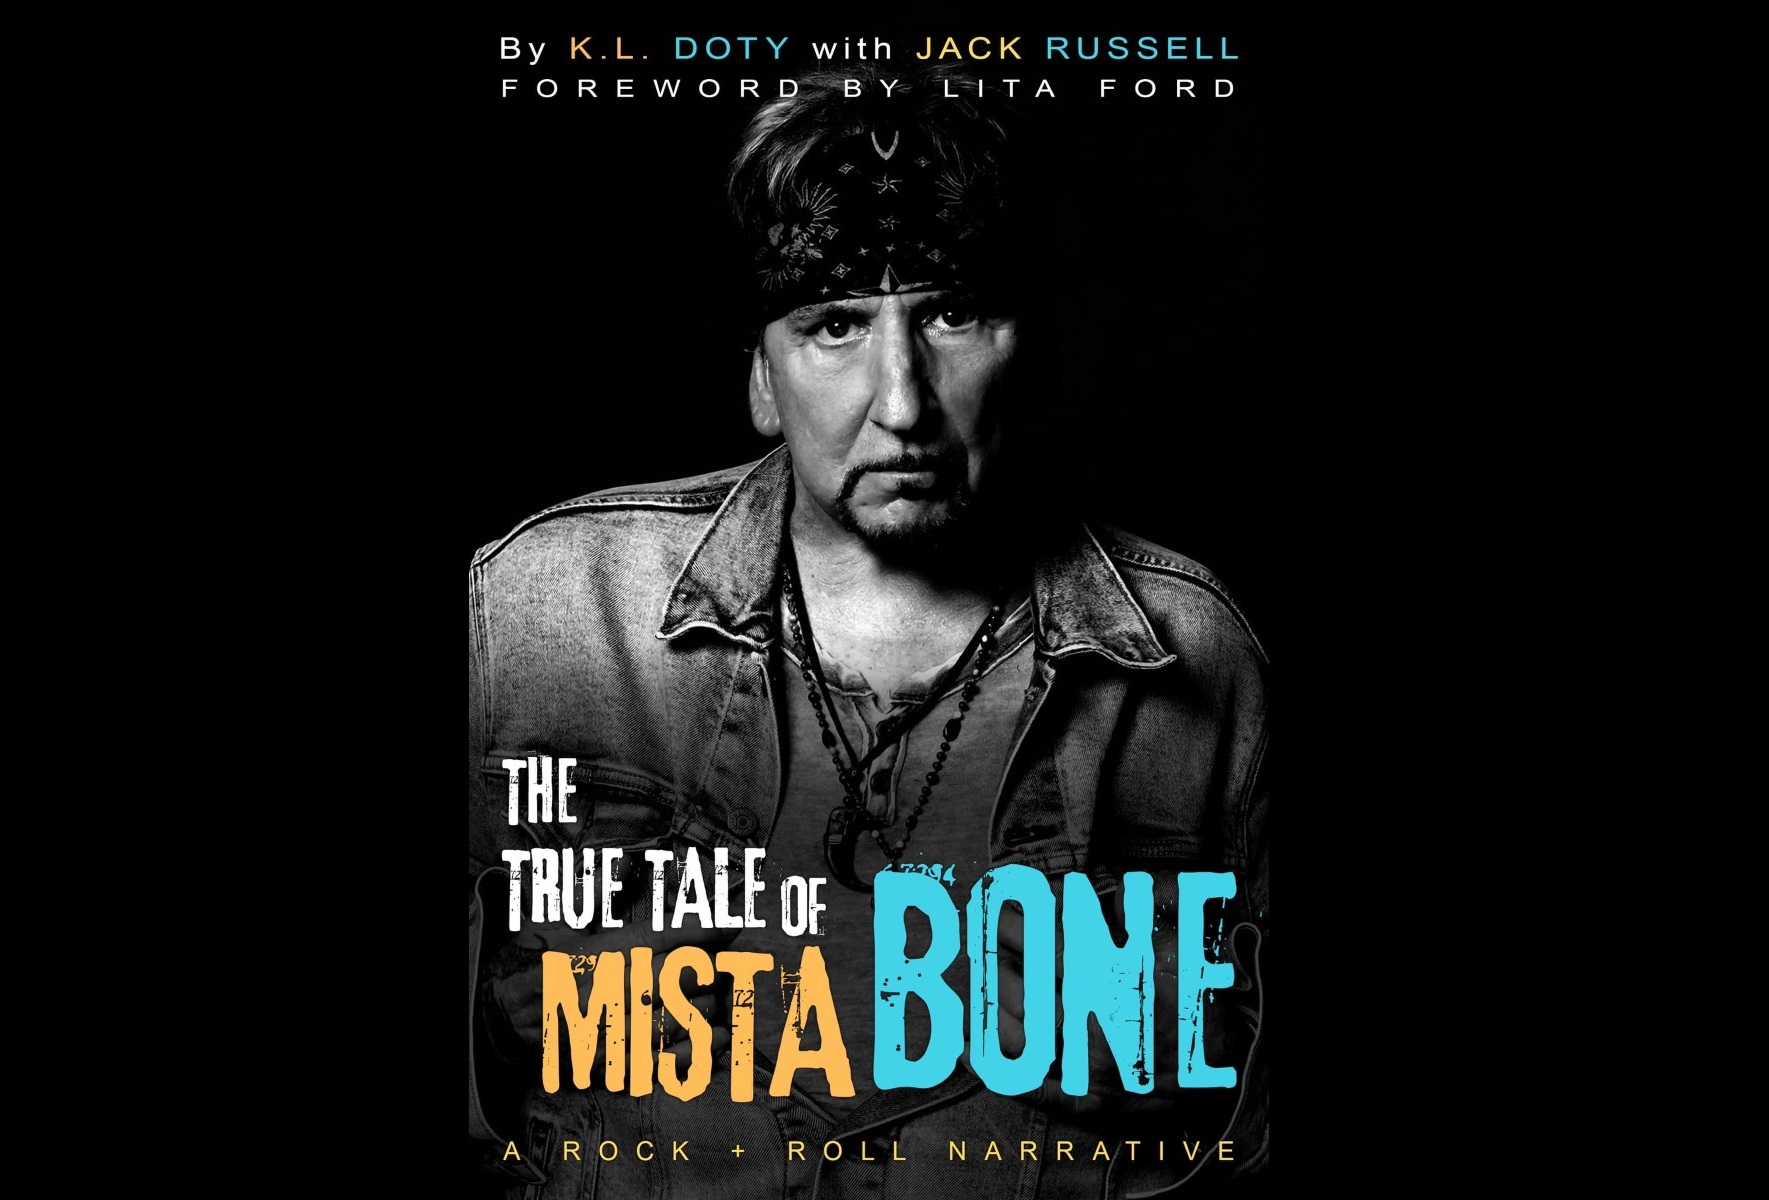 Original Great White Singer Jack Russell's Autobiography To Be Released